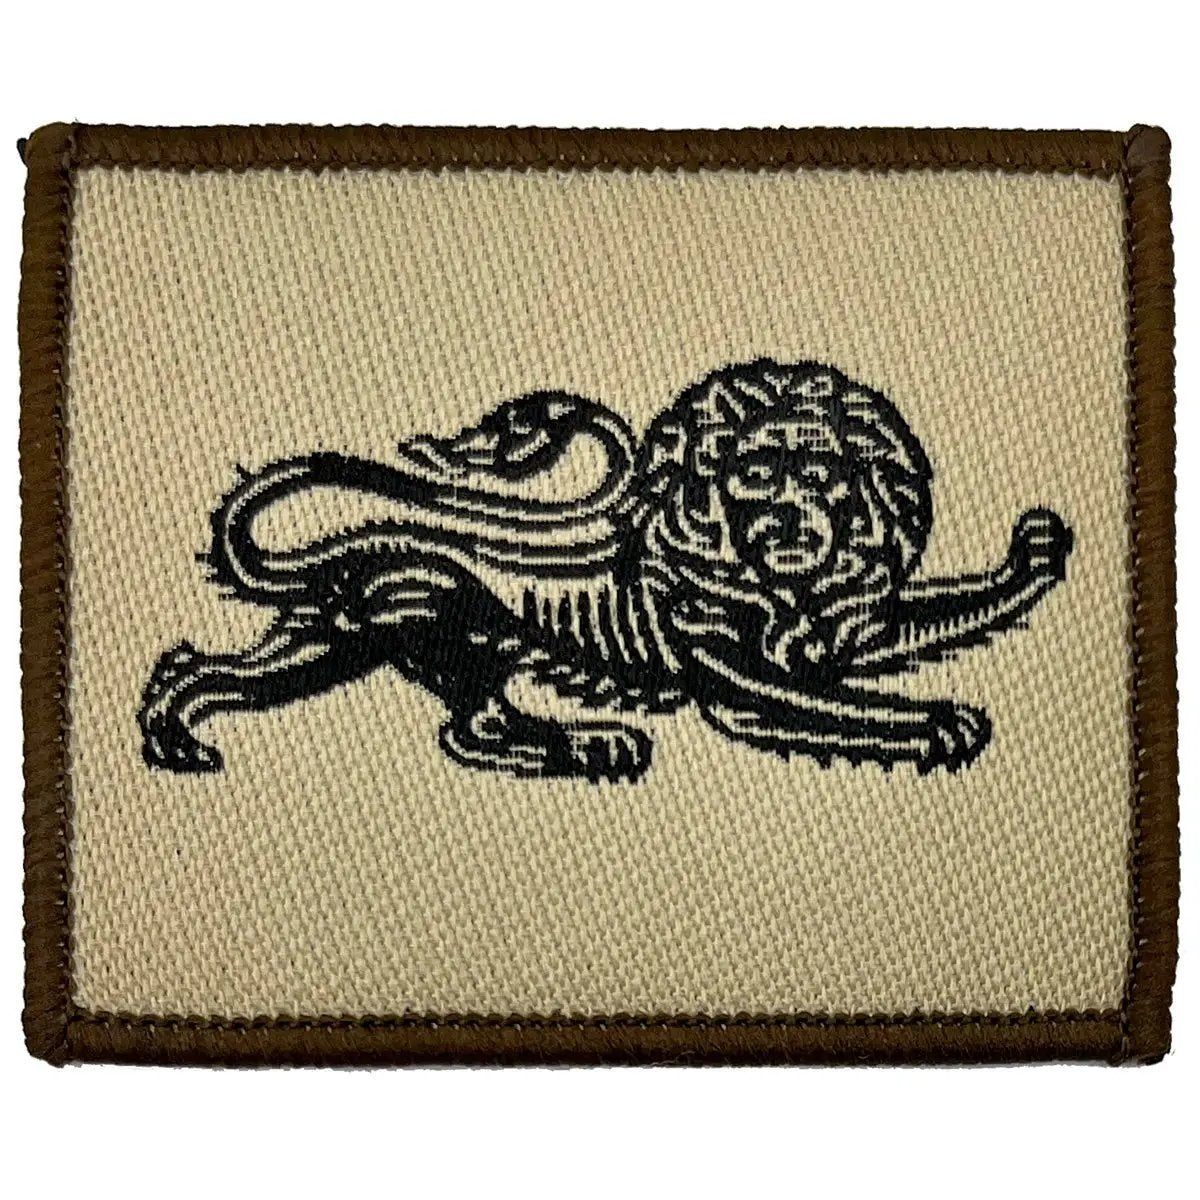 Duke of Lancasters TRF - Iron or Sewn On Patch - John Bull Clothing